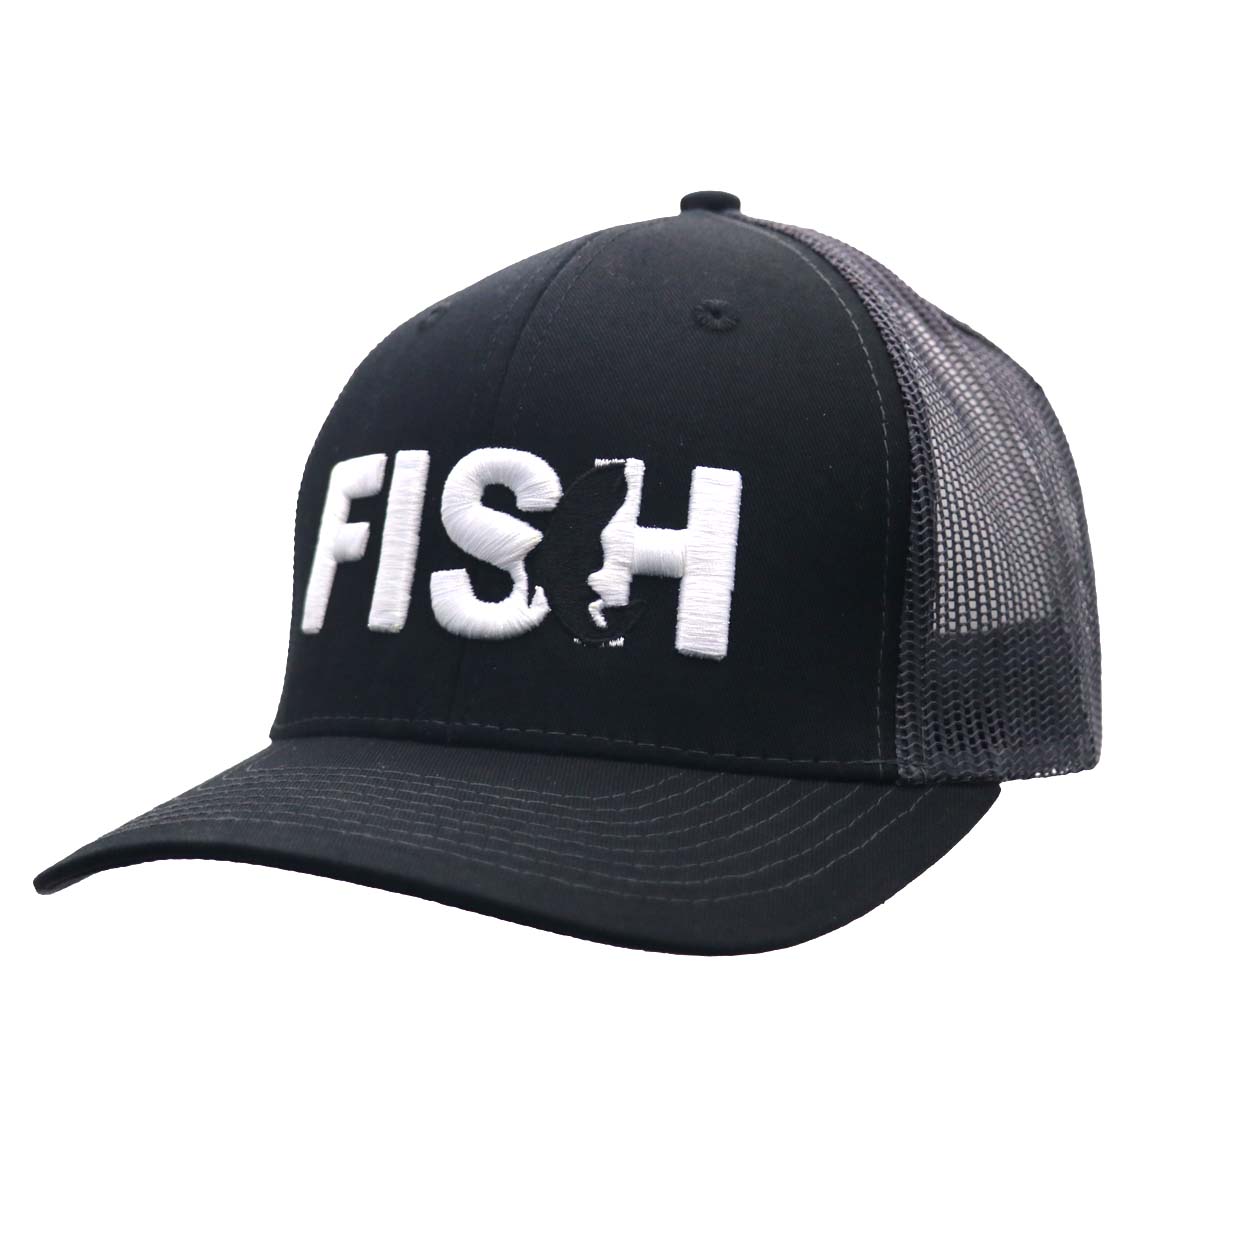 Fish Catch Logo Classic Embroidered Snapback Trucker Hat Black/Gray